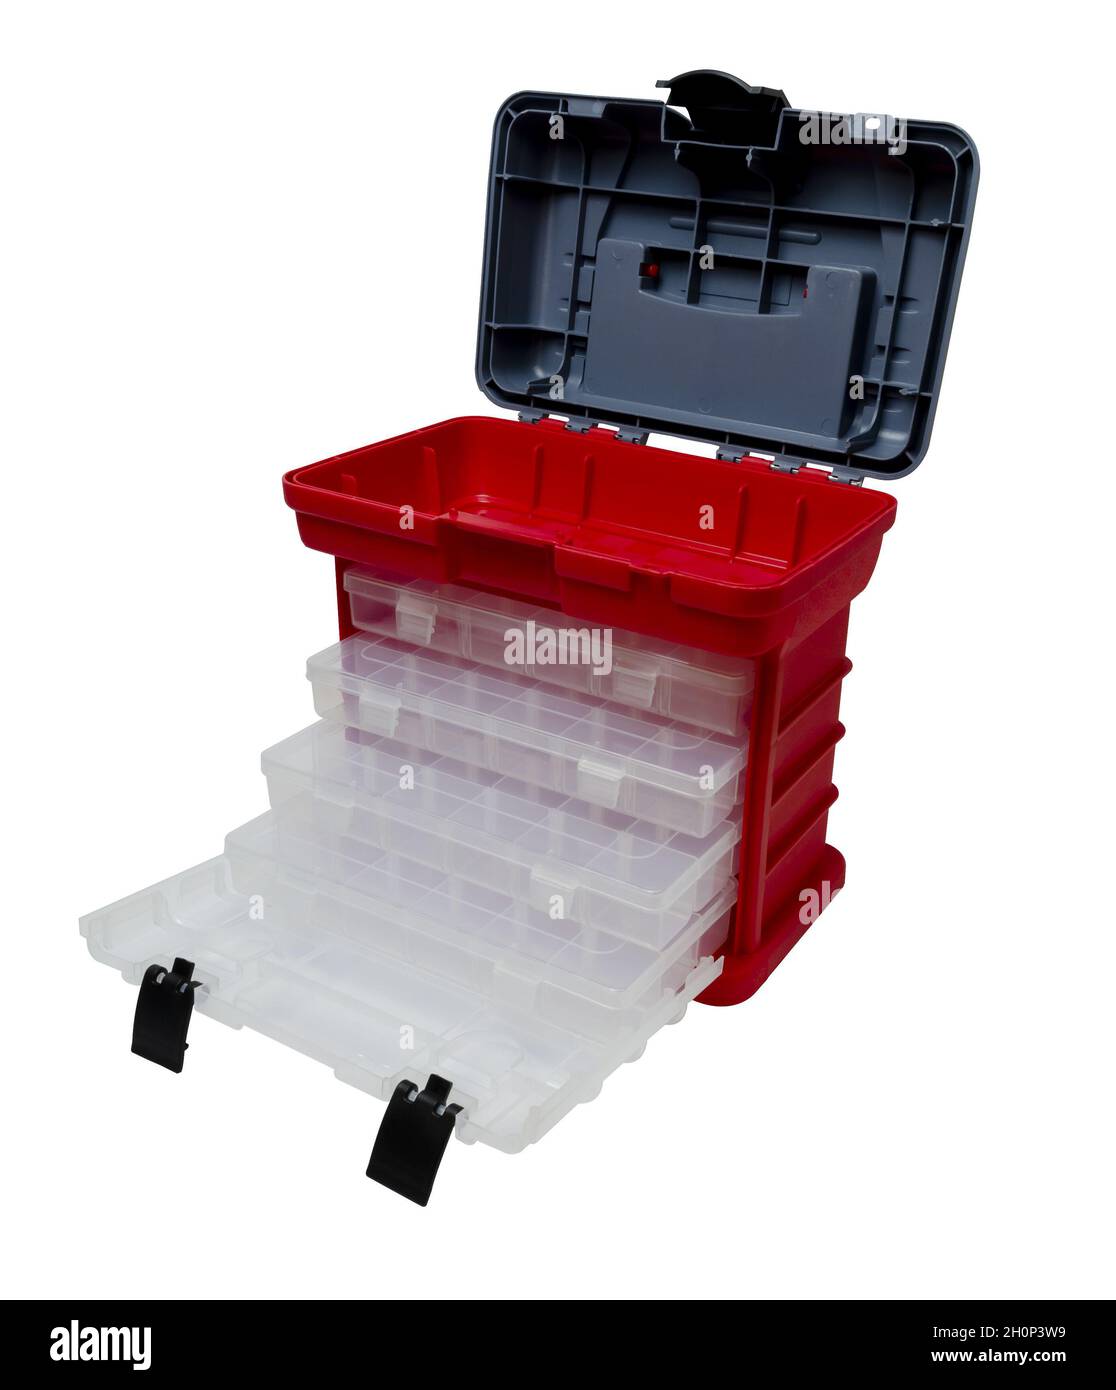 plastic boxes and containers for storing and carrying tools and various little things in the range Stock Photo